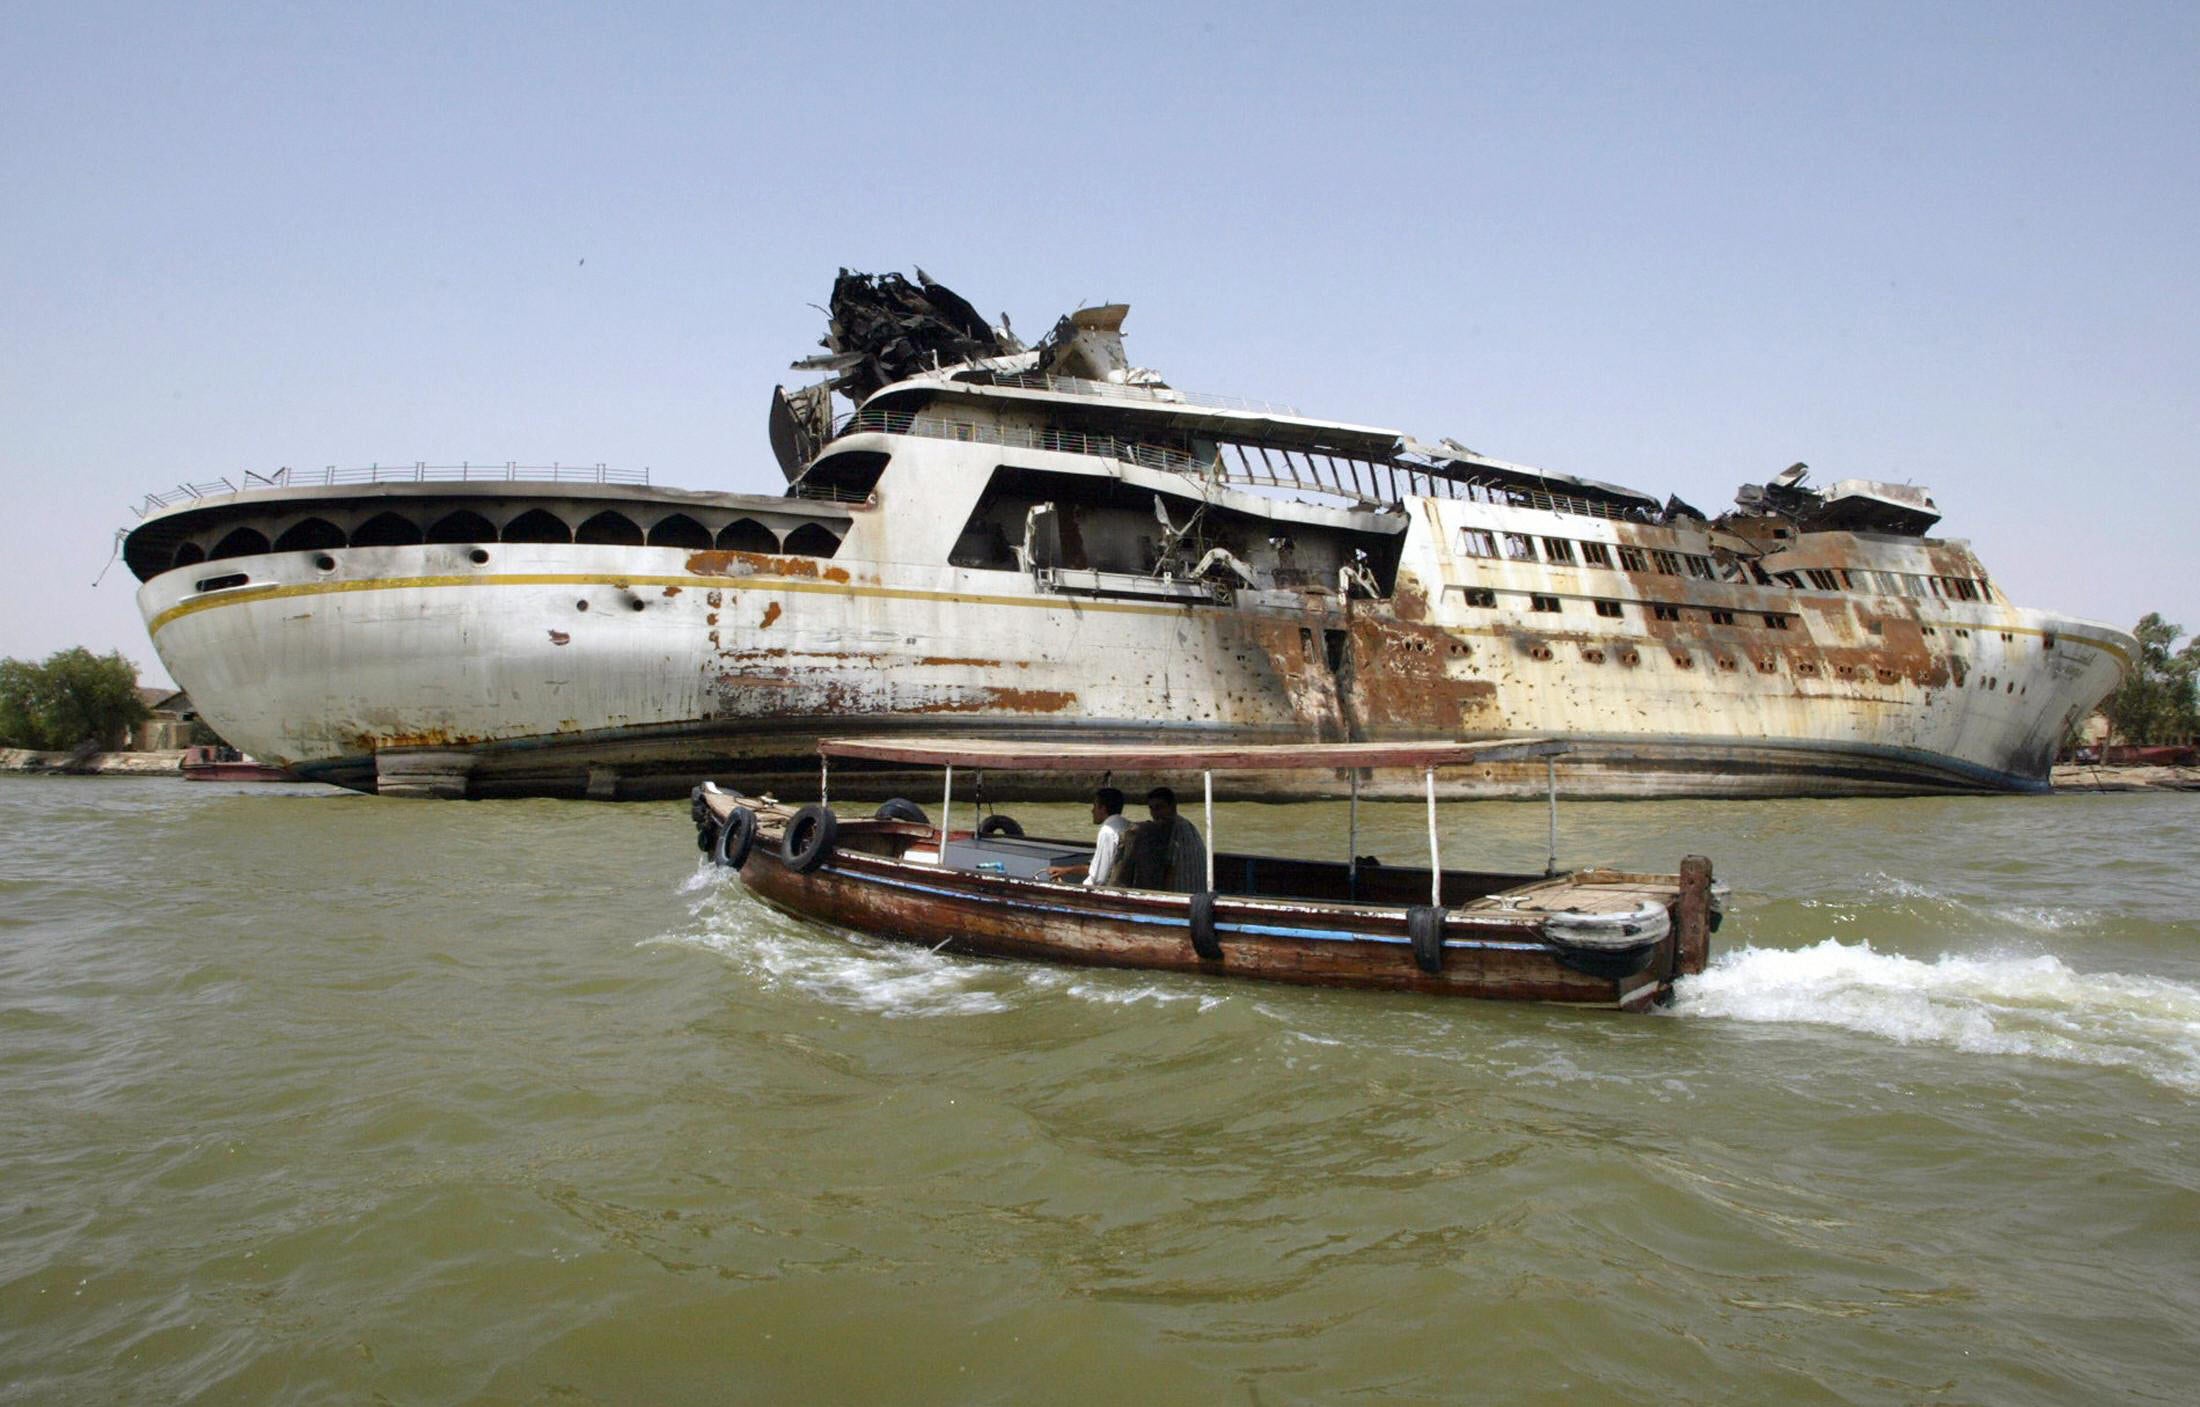 Saddam Hussein’s Capsized Yacht Is a Curious Attraction For Sightseers and Locals in Iraq